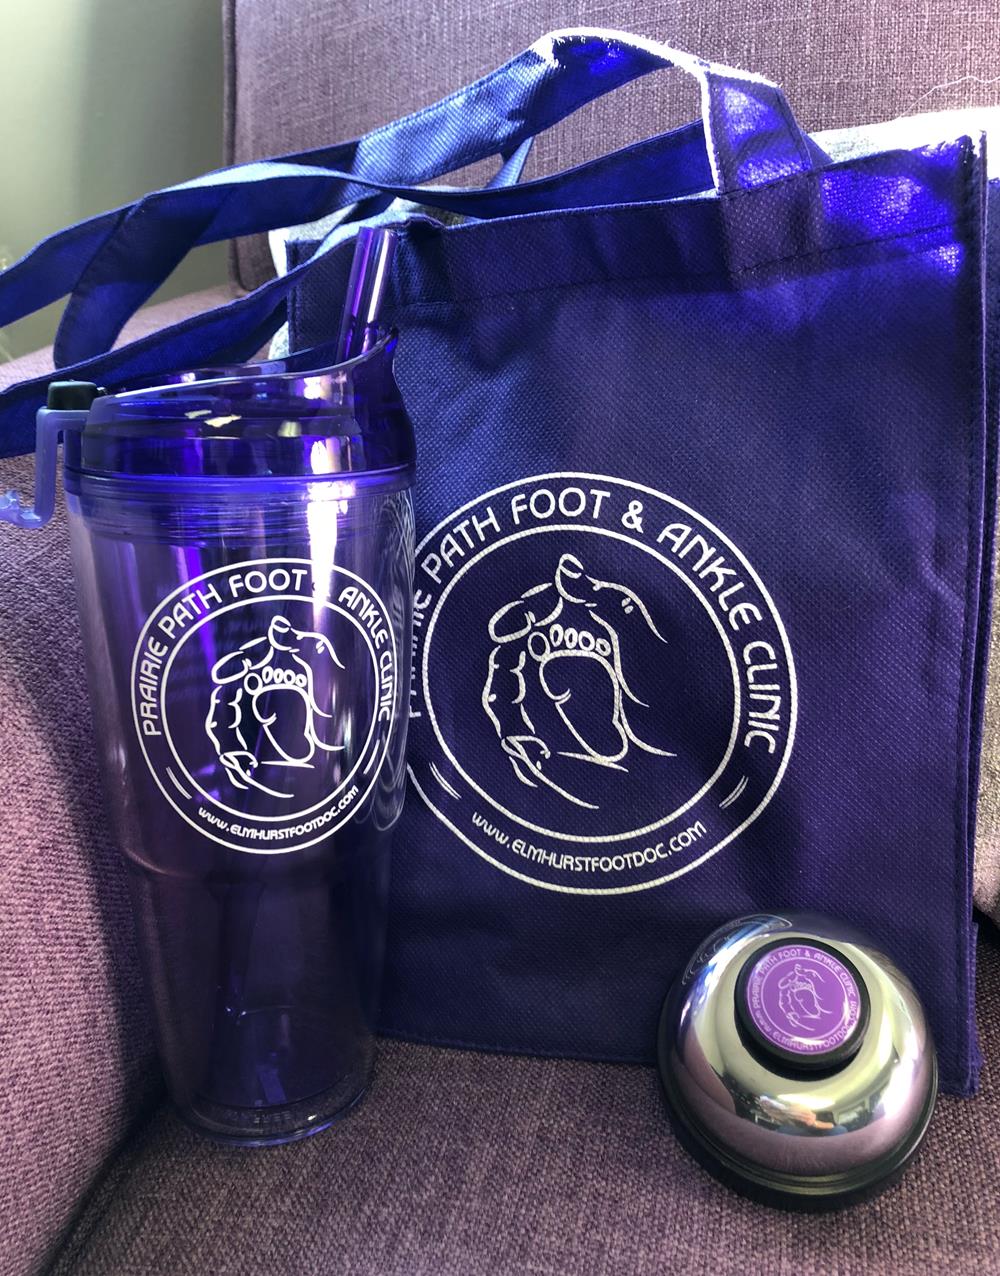 a purple cup and a blue bag